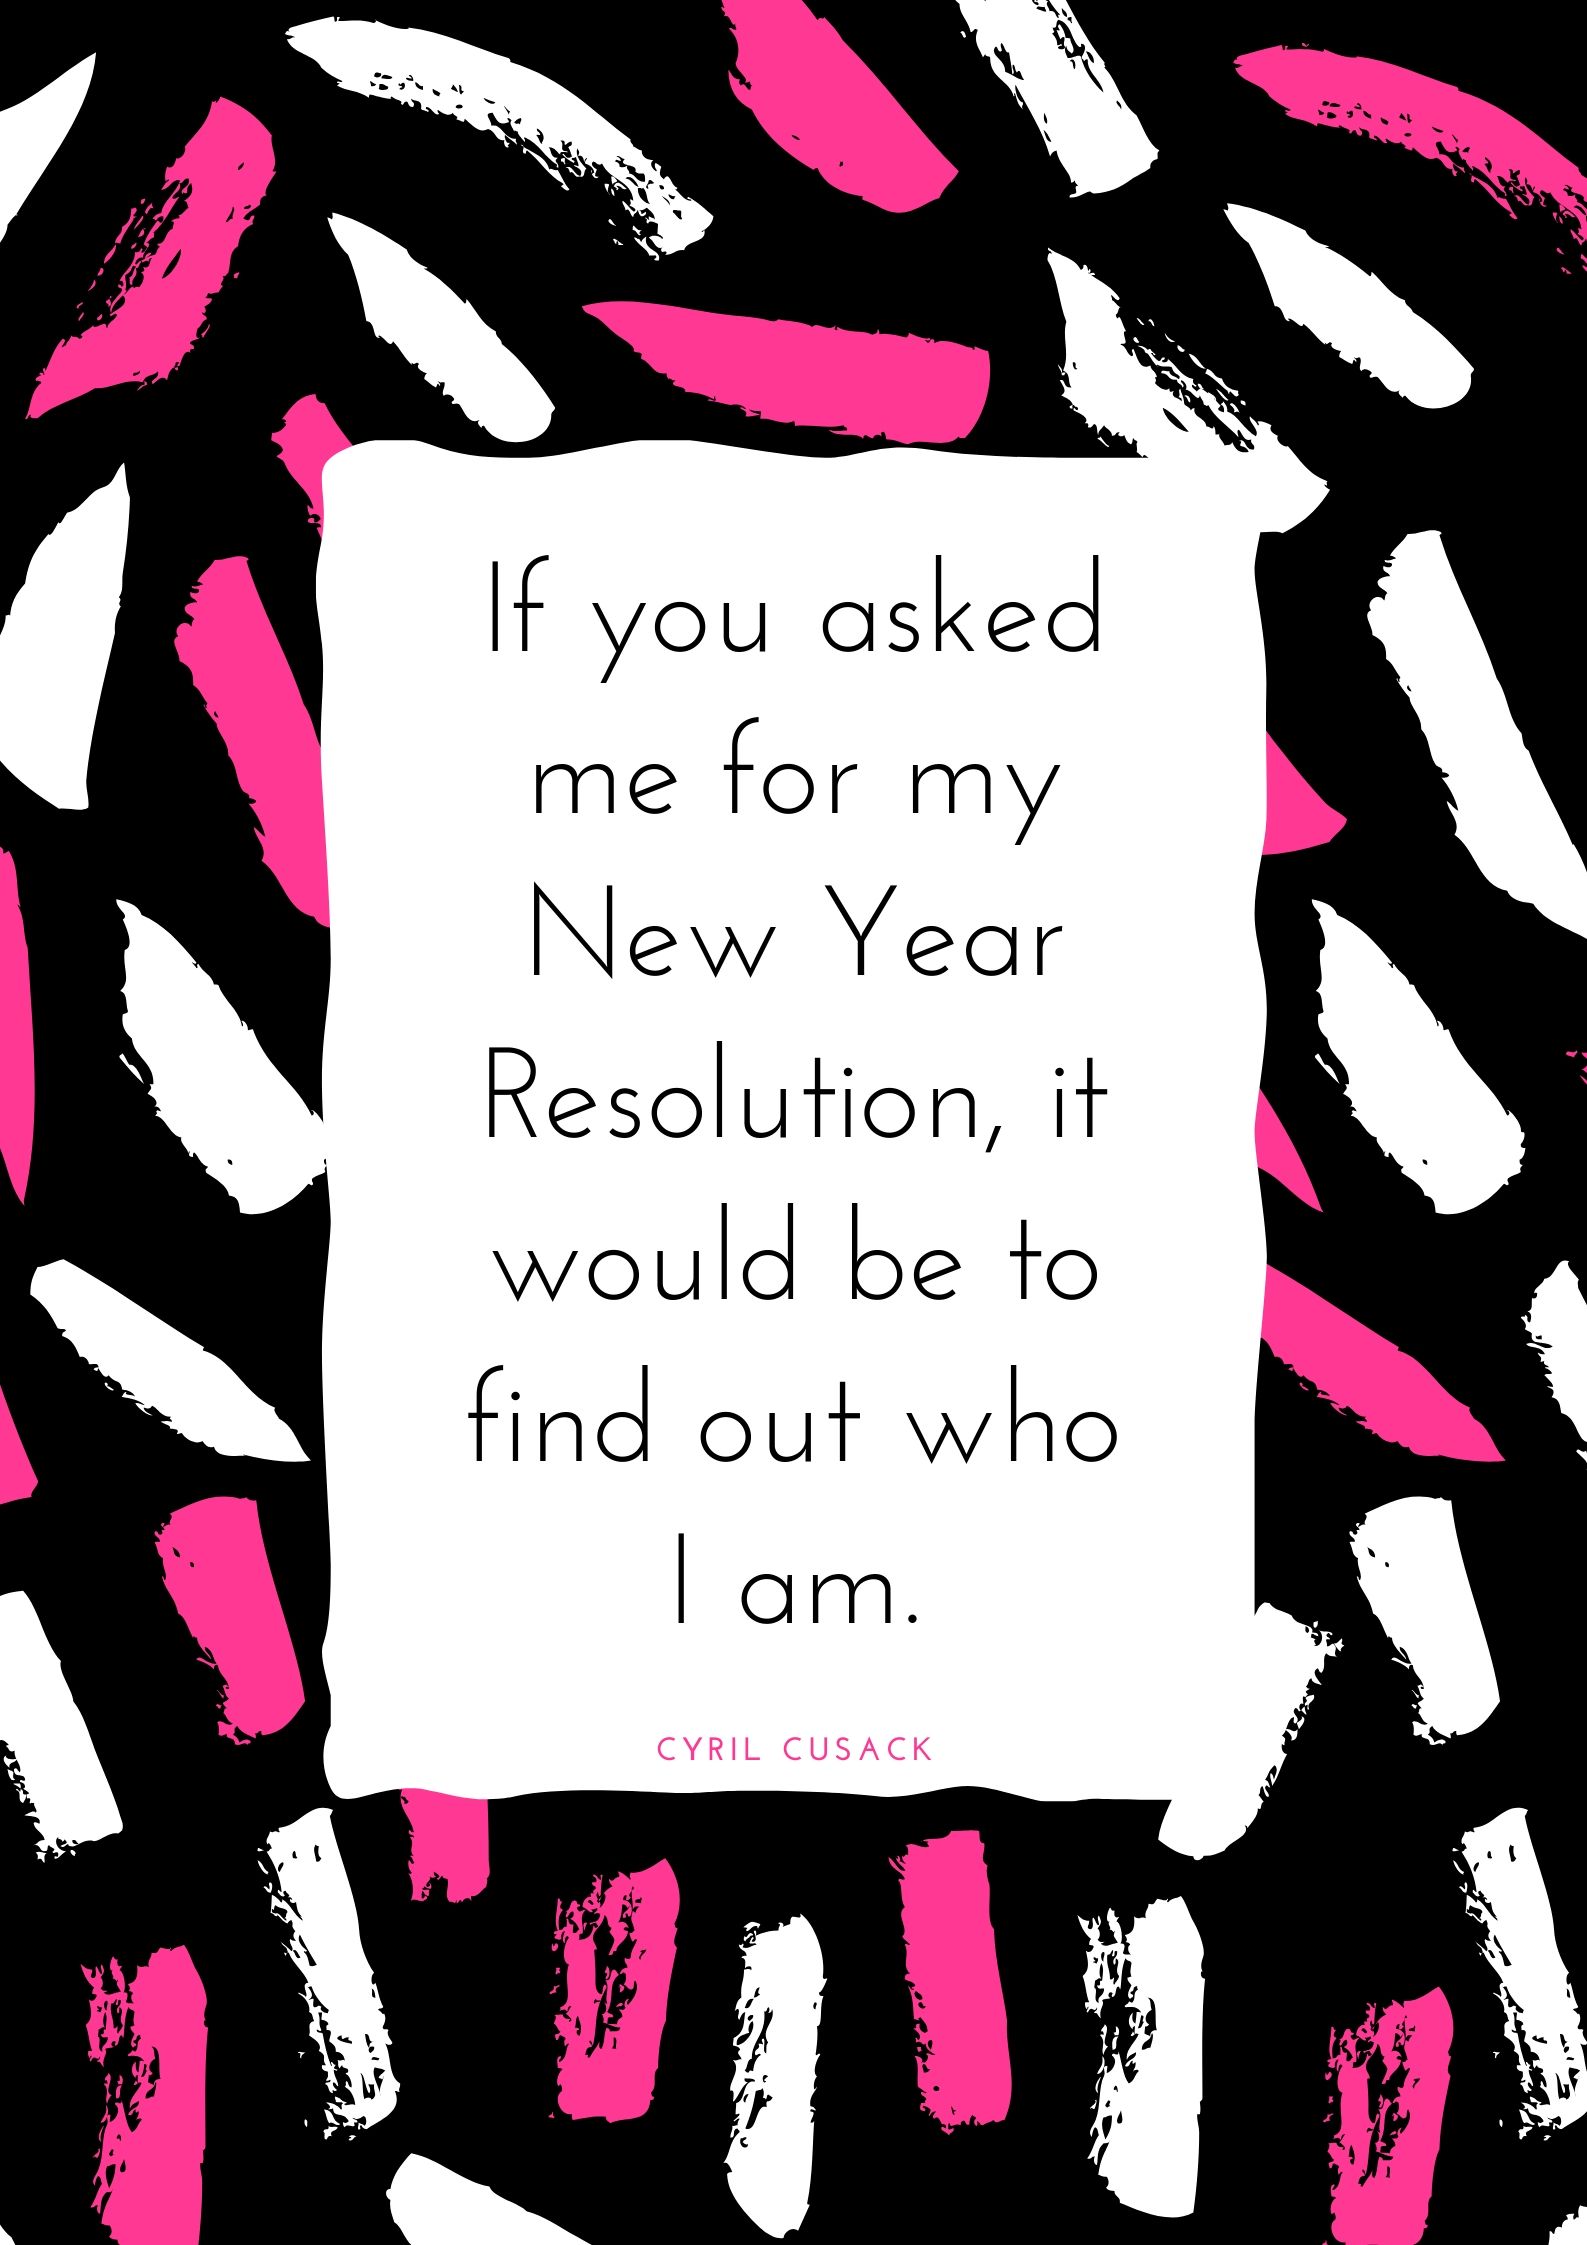 If you asked me for my New Year Resolution, it would be to find out who I am.